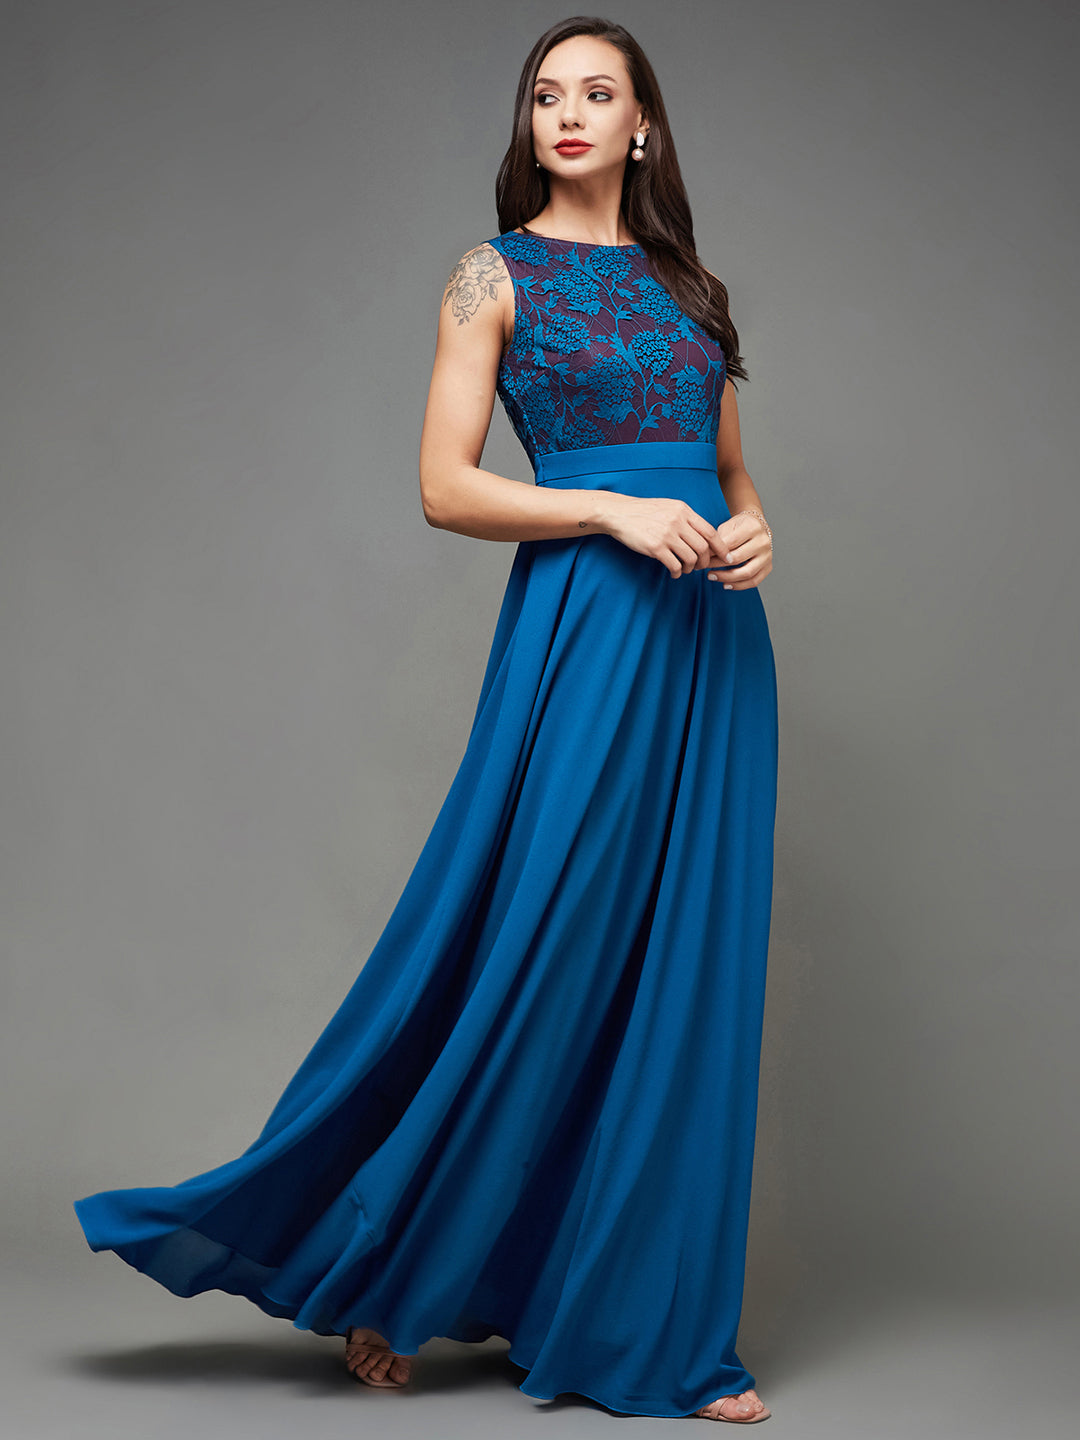 Women's Royal Blue Round Neck Sleeveless Georgette Floral Lace Fit & Flare Maxi Dress